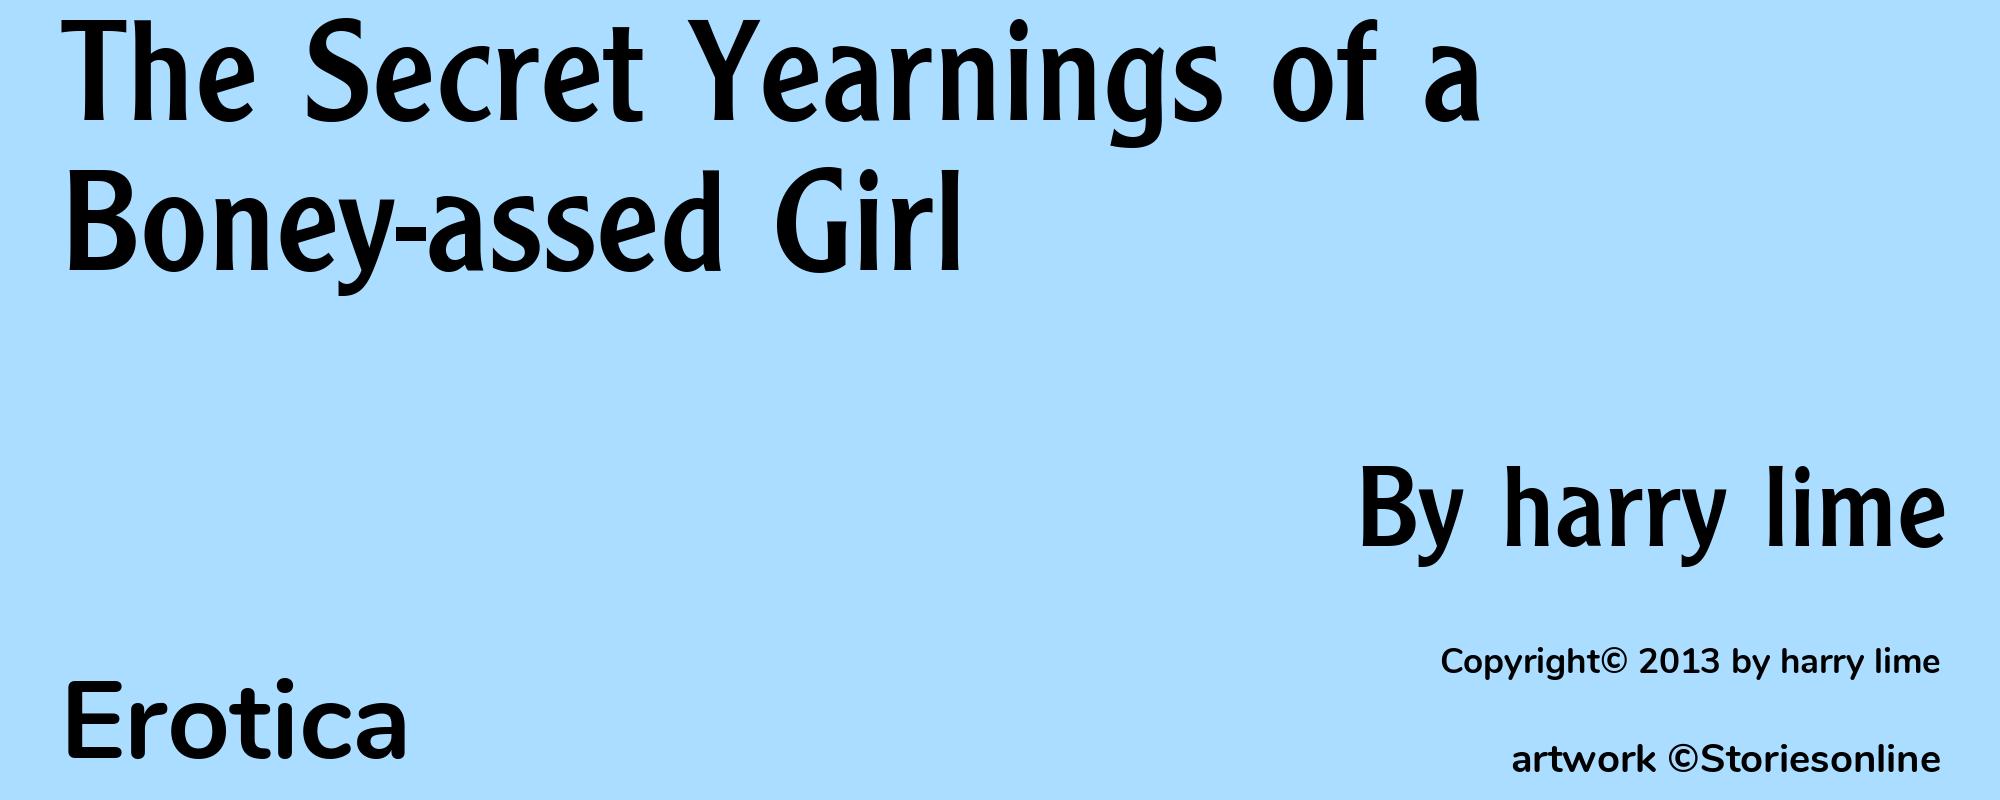 The Secret Yearnings of a Boney-assed Girl - Cover